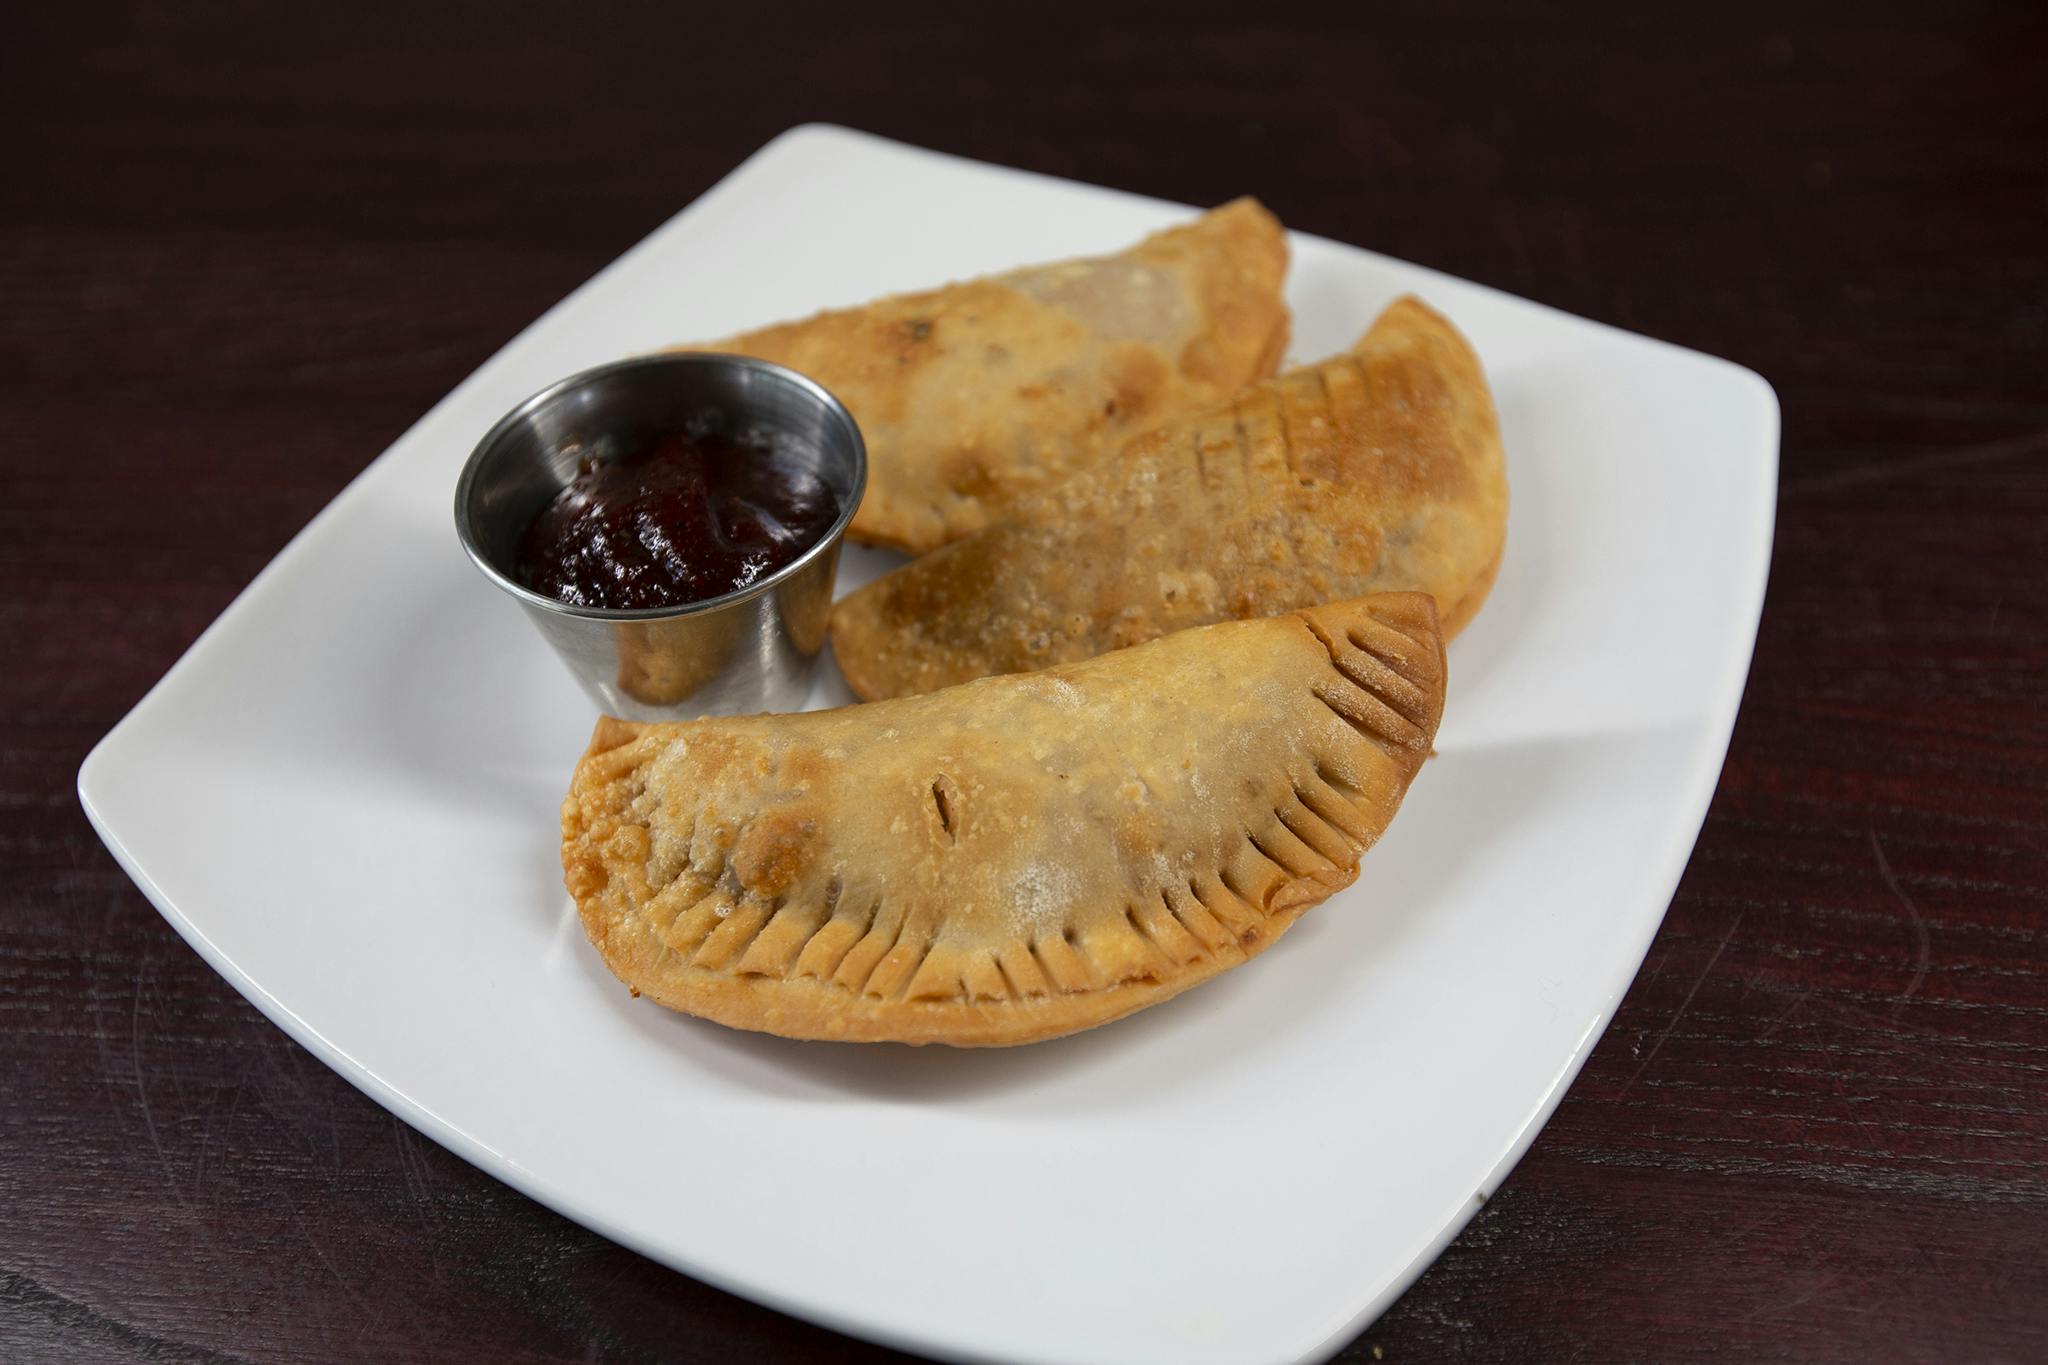 Empanadas from Firehouse Grill - Chicago Ave in Evanston, IL